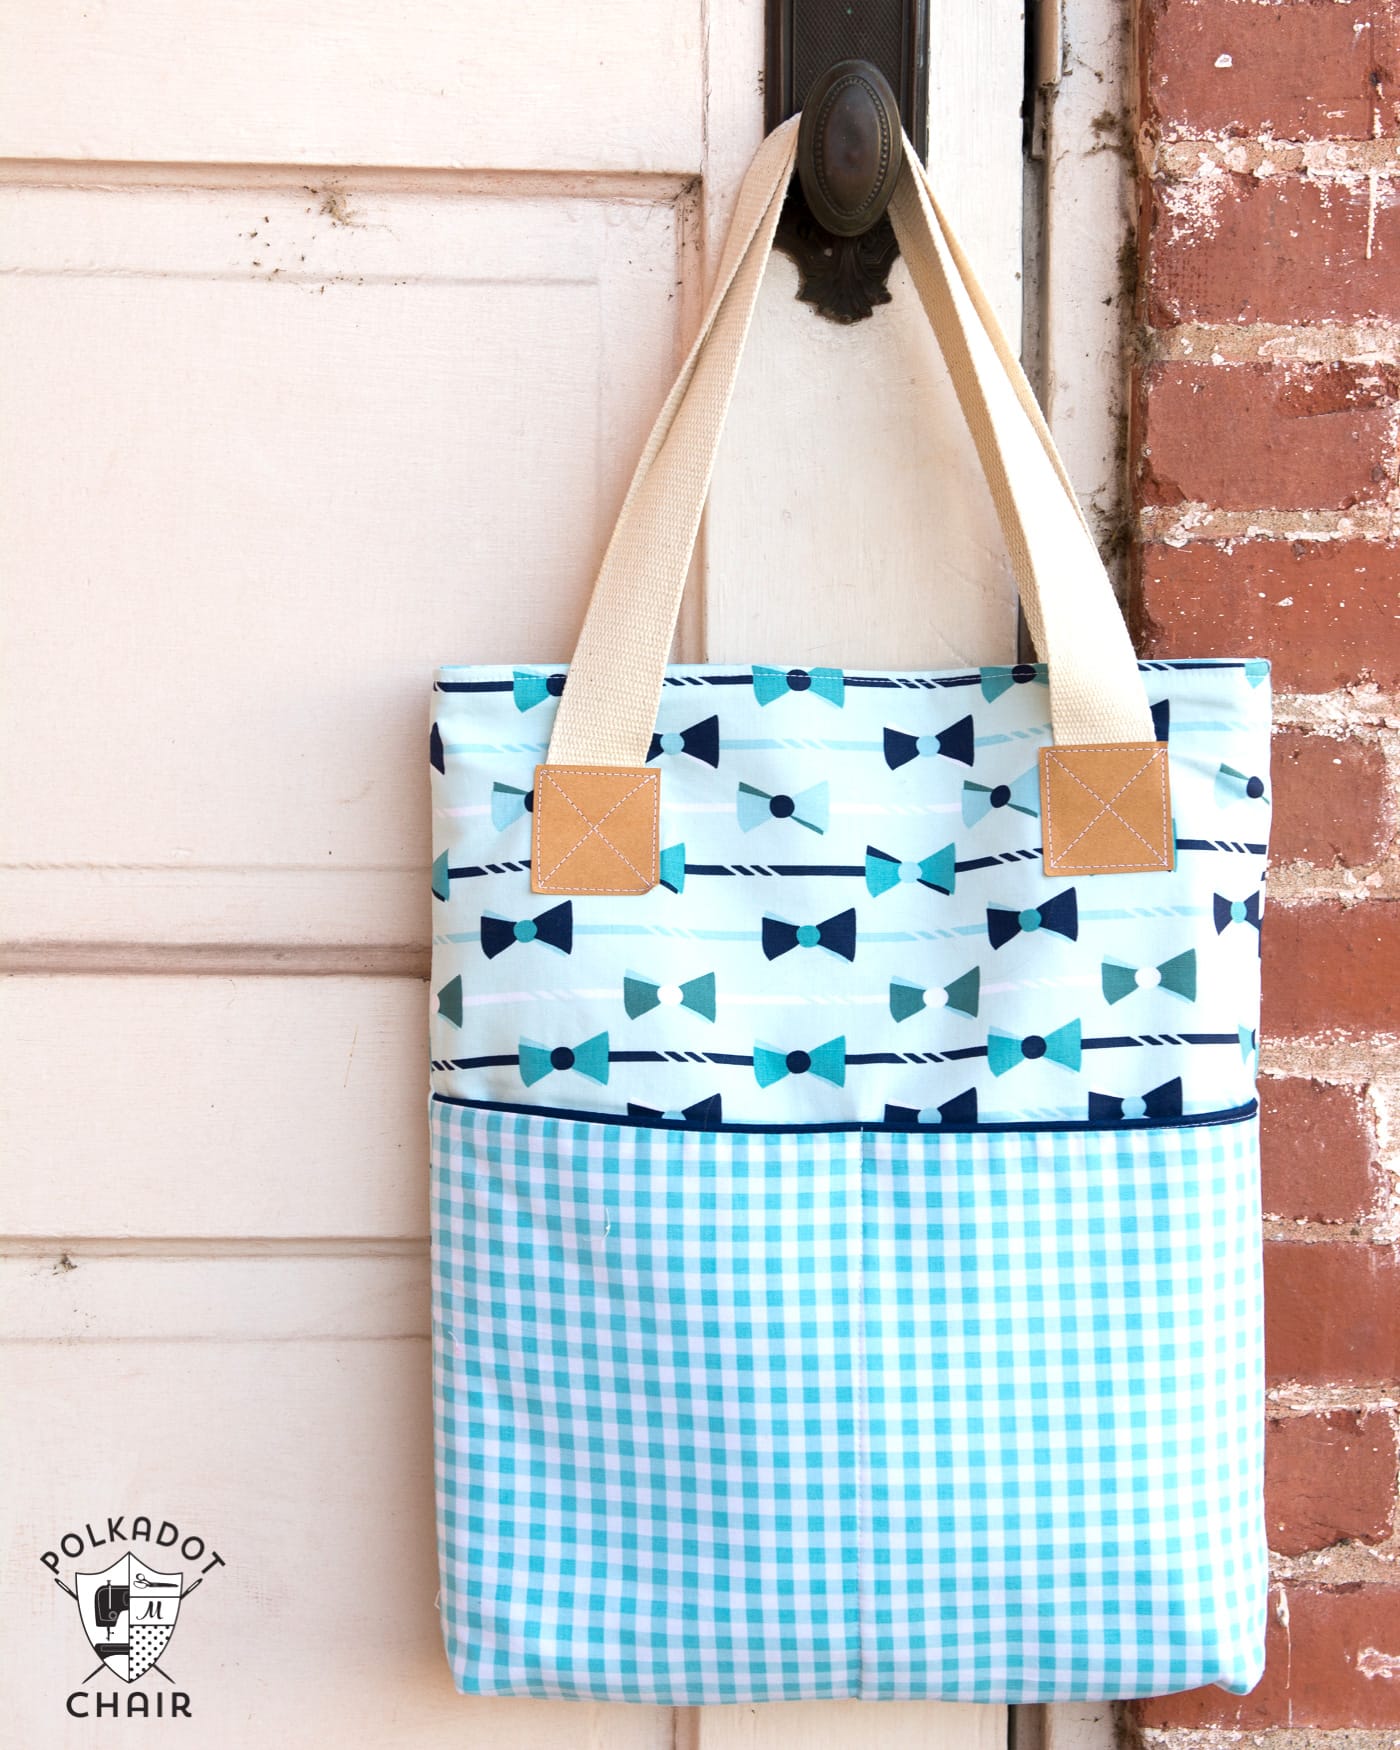 A New Tote Bag Sewing Pattern - The Polka Dot Chair